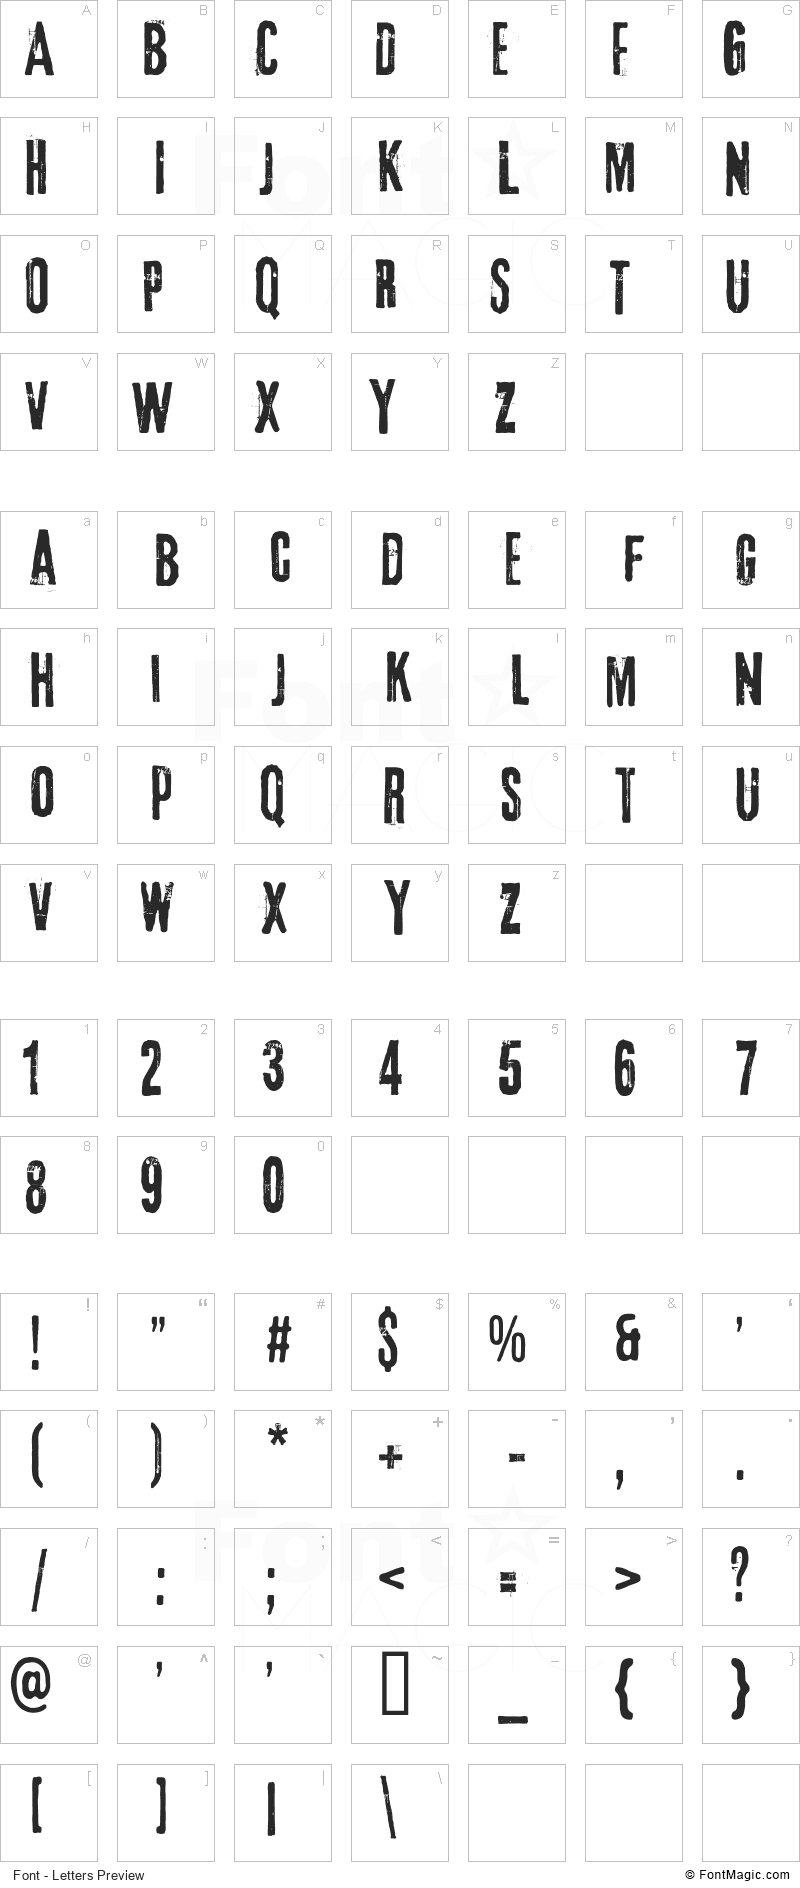 3rd Man Font - All Latters Preview Chart